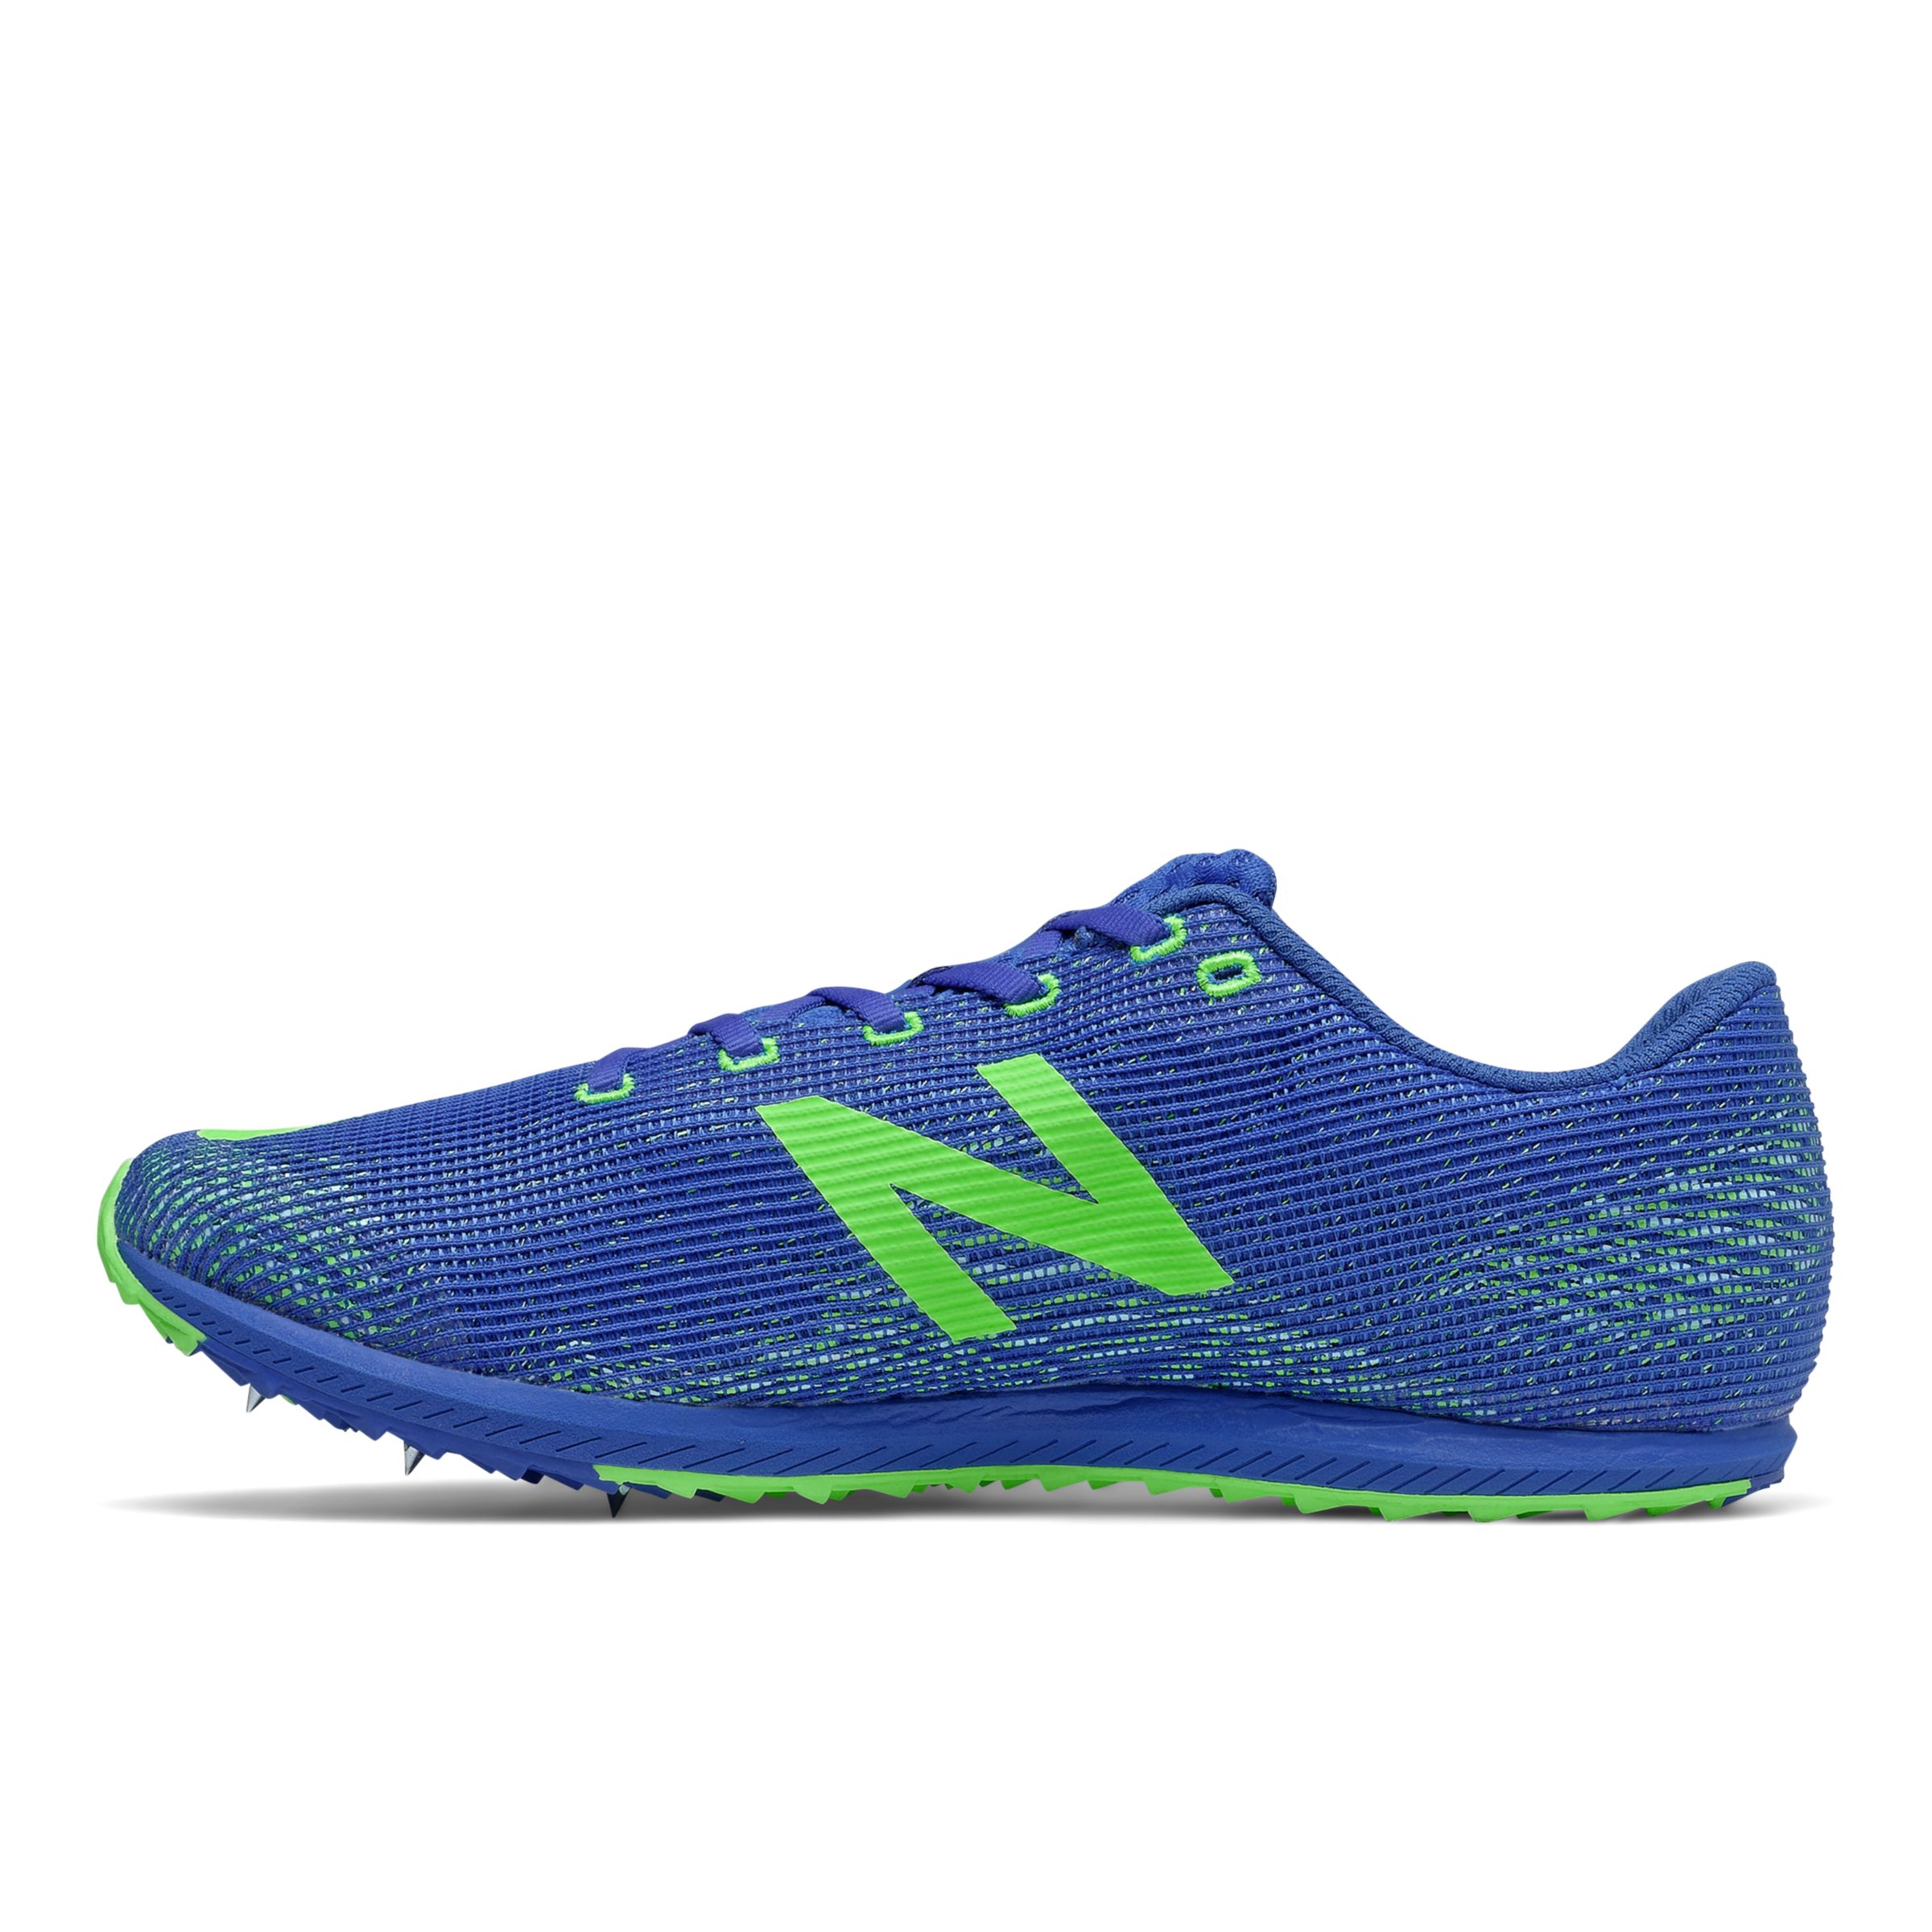 new balance xc seven review